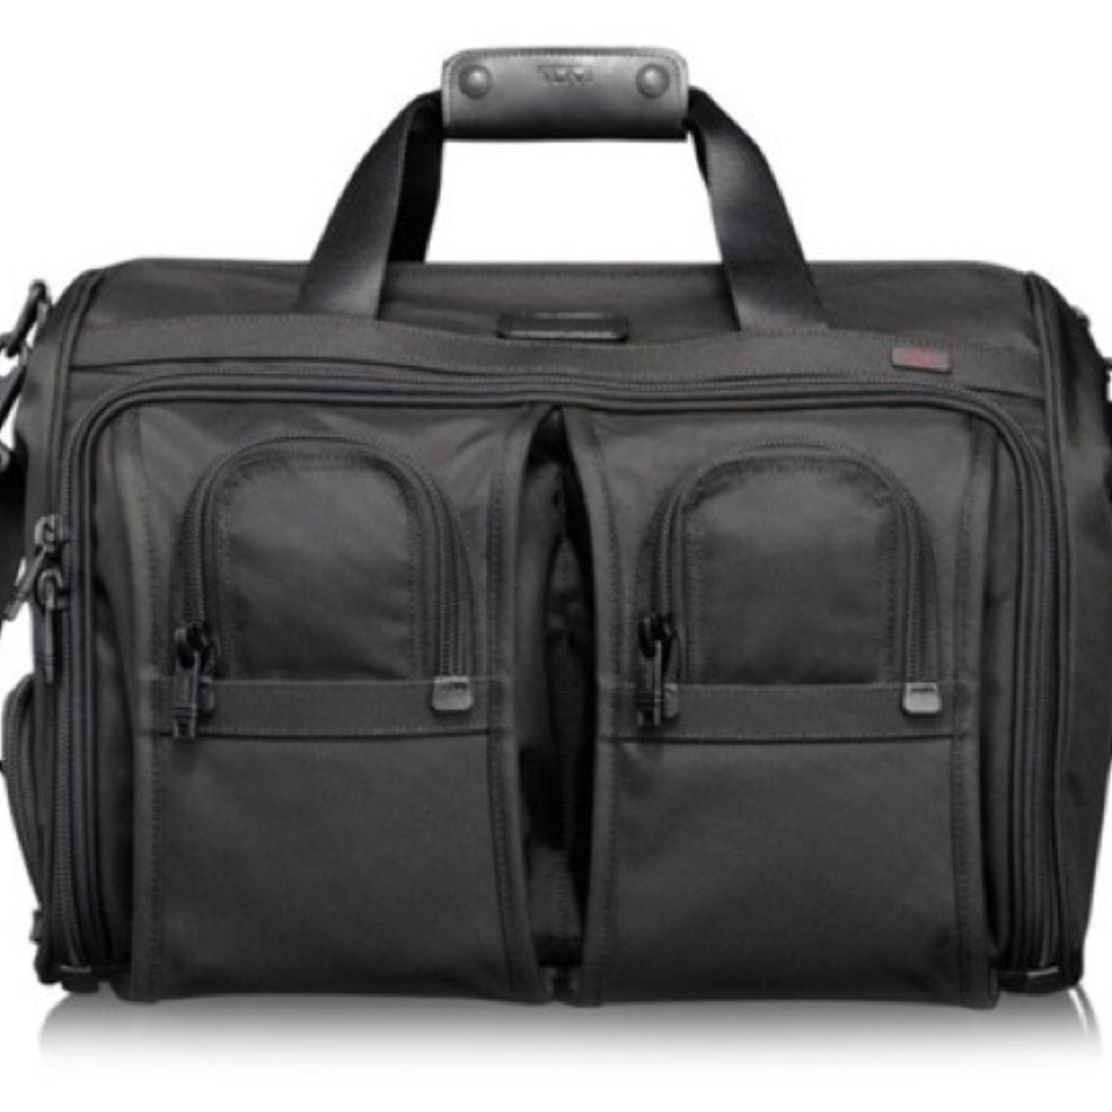 Tumi Alpha Deluxe Carry-on Satchel, Med/Travel Bag  022124DH - Black